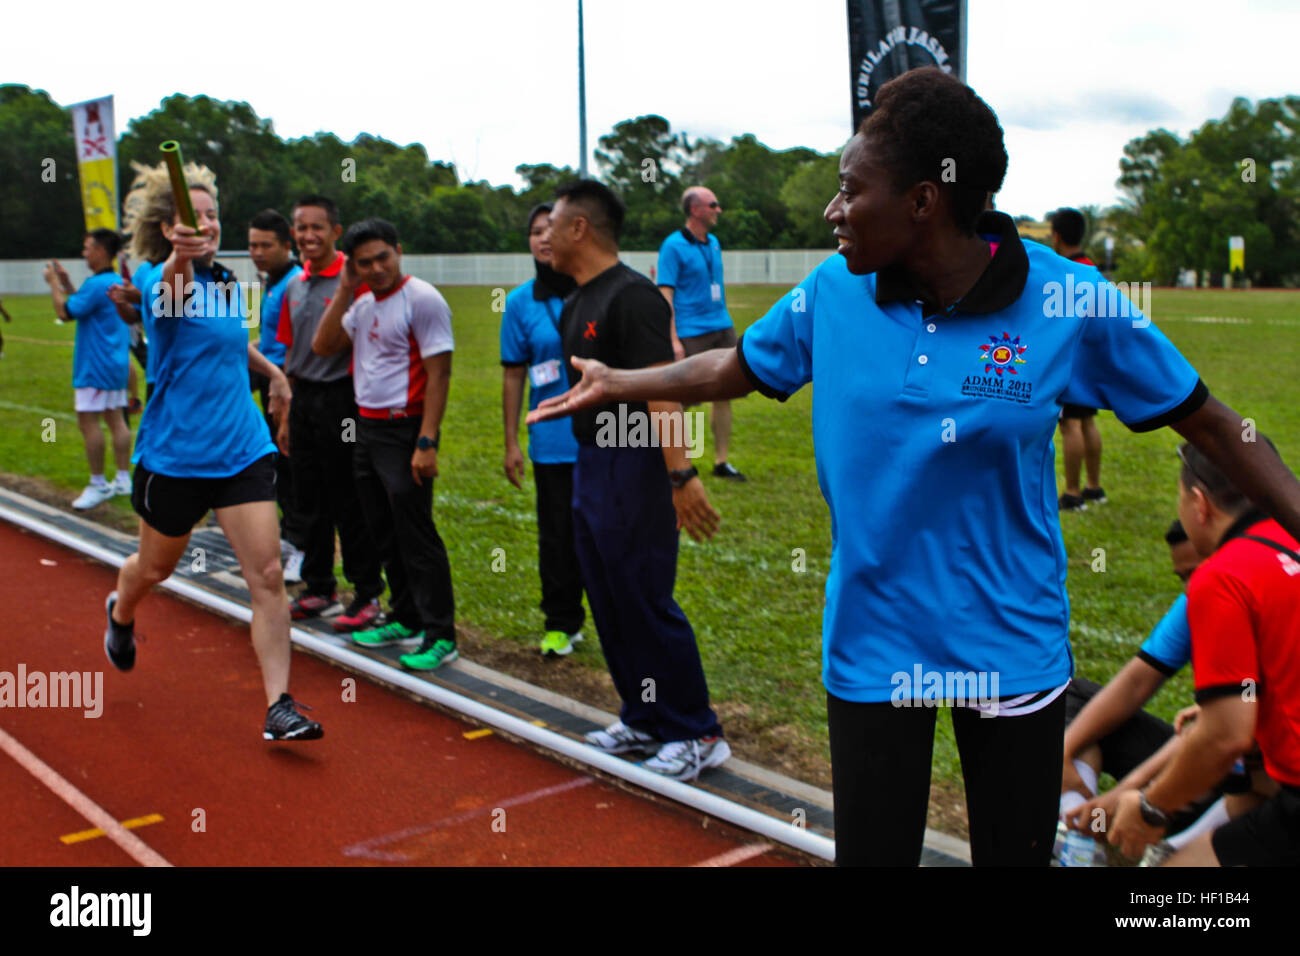 U.S. Army Staff Sgt. Aiyana Harris, right, awaits a baton pass from U.S. Navy Lt. Cmdr. Kristie Robson in a relay race during a sports field meet at Berakas Army Garrison Camp, Brunei Darussalam, June 14. The competition took place as part of the Association of Southeast Asian Nations Defence Ministers Meeting (ADMM) - Plus ASEAN Humanitarian Assistance/Disaster Relief and Military Medicine Exercise (AHMX). During the field meet, nations competed in a four-team, 400-meter relay event and a tug-of-war competition. Harris is a licensed practical nurse at Tripler Army Medical Center. Robson is an Stock Photo